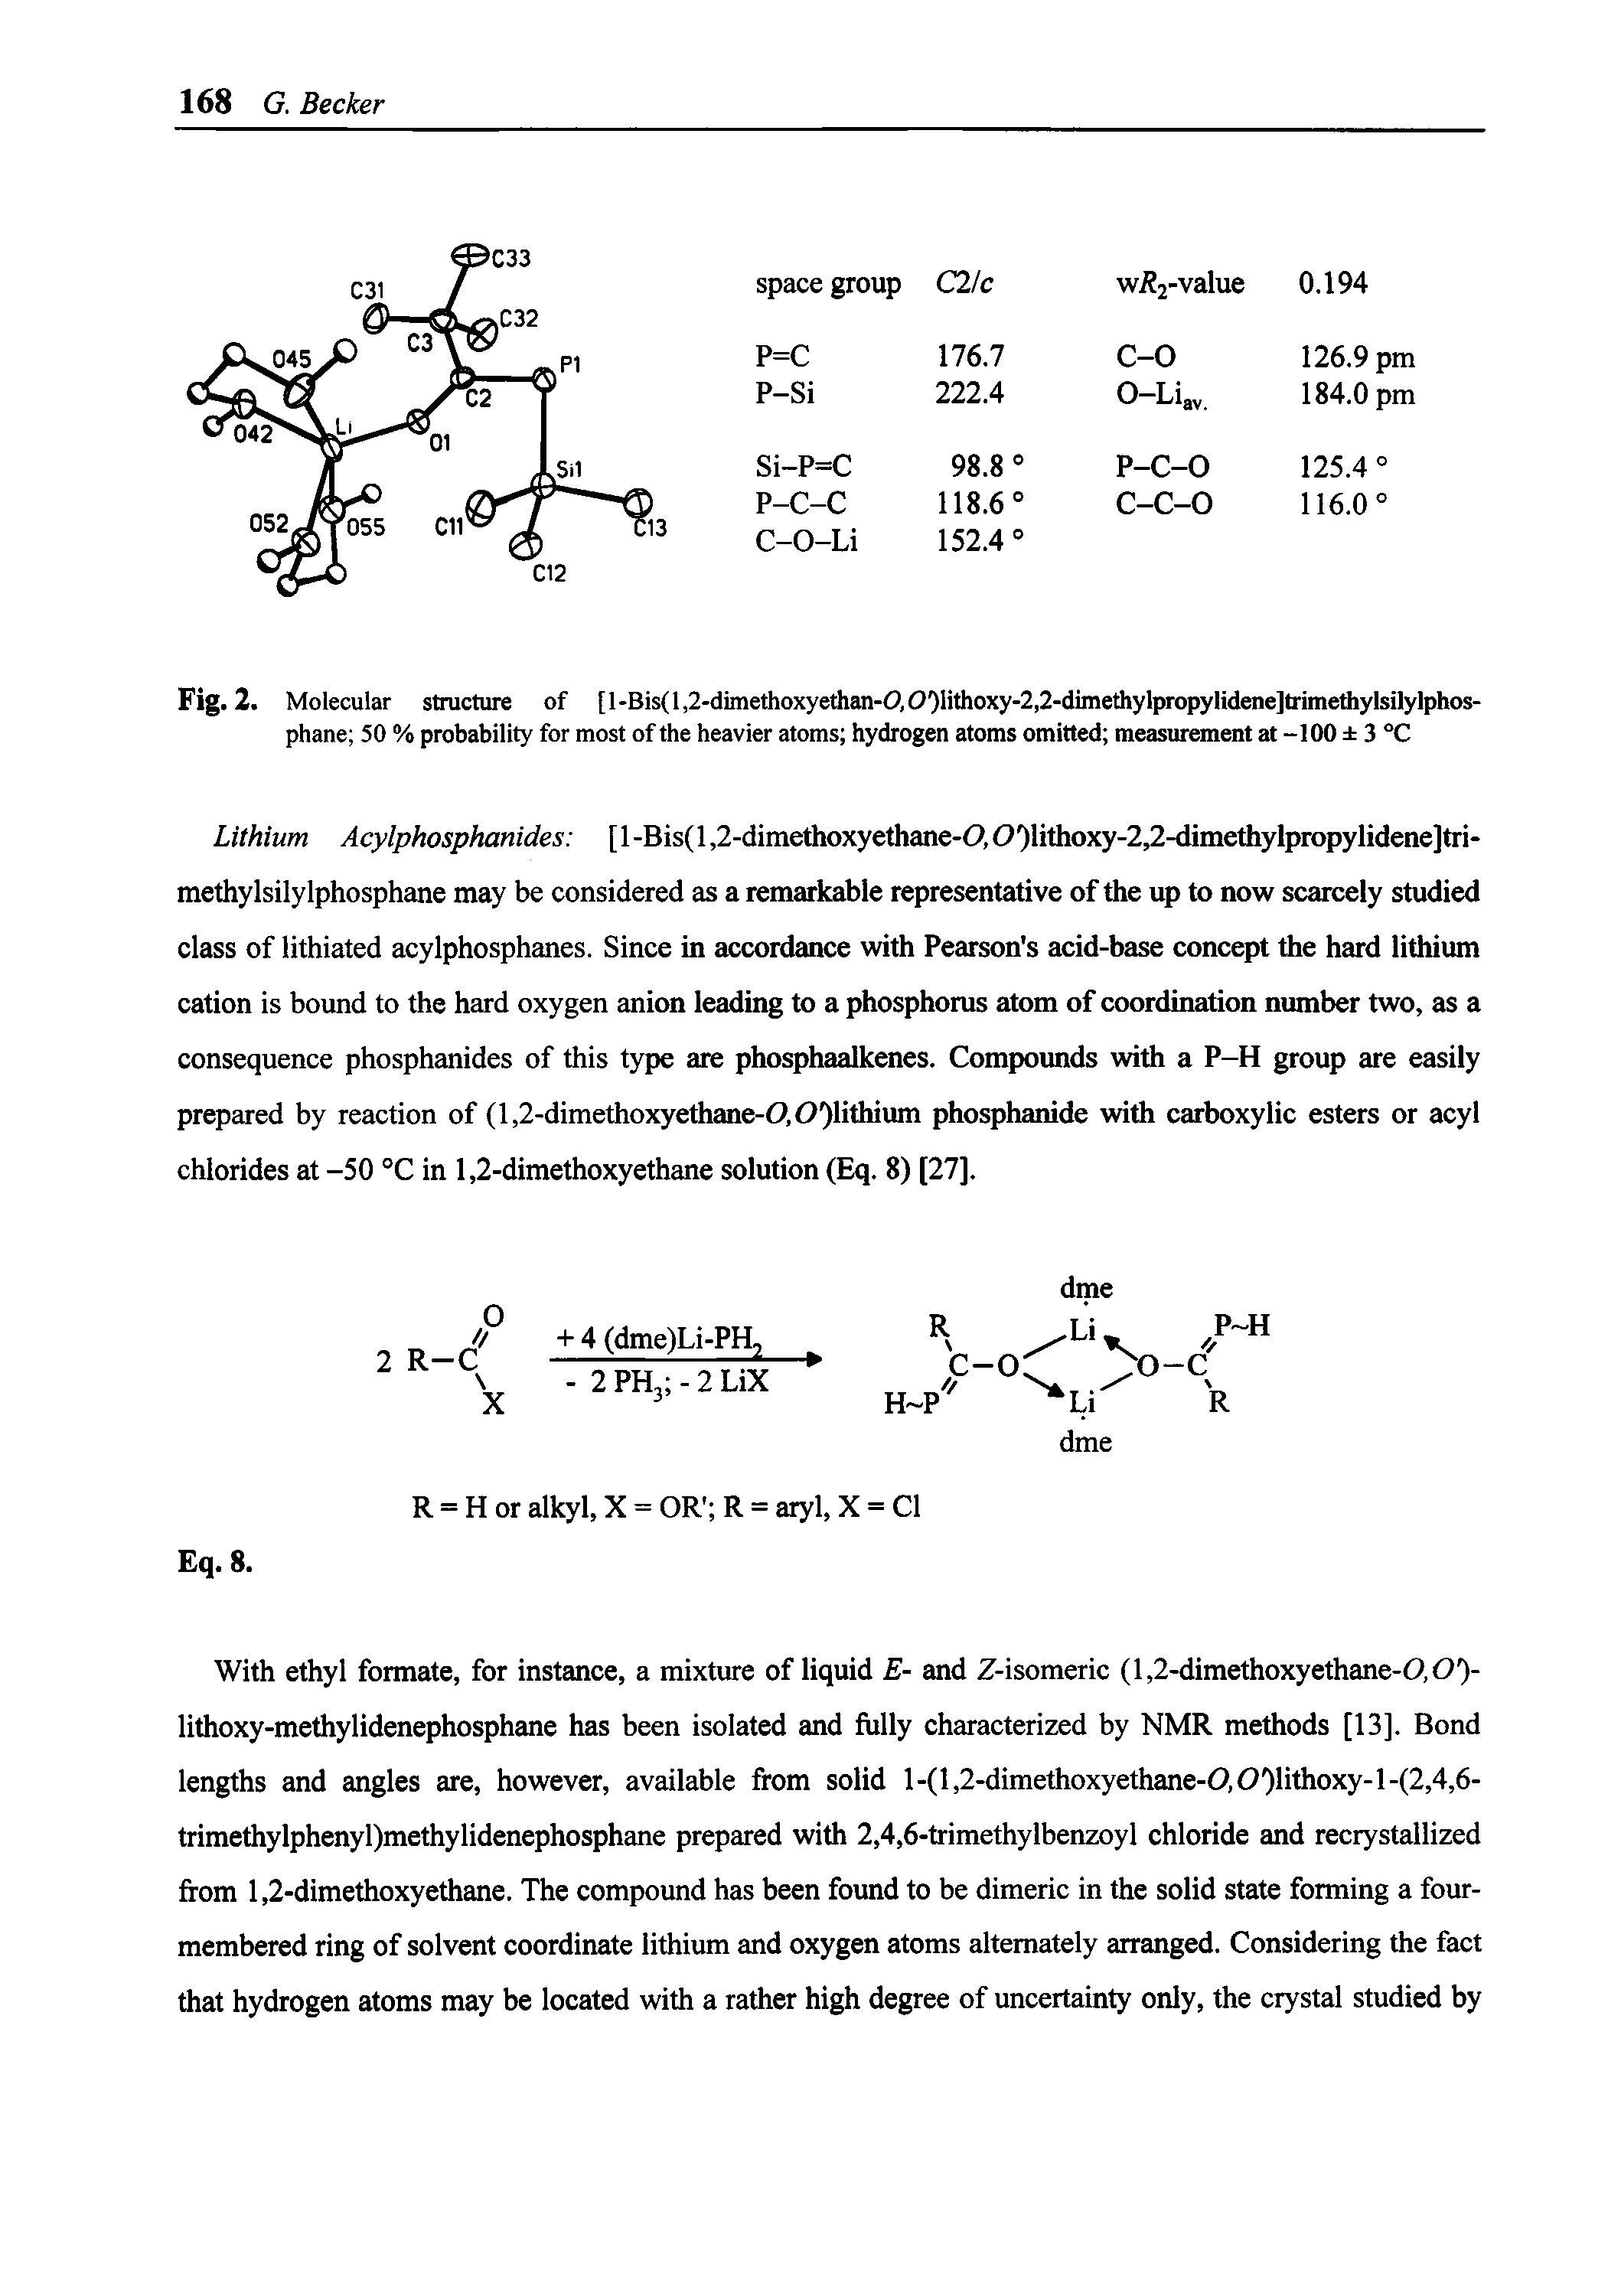 Fig. 2. Molecular structure of [l-Bis(l,2-dimethoxyethan-0,0 )lithoxy-2,2-dimethylpropylidene]trimethylsilylphos-phane 50 % probability for most of the heavier atoms hydrogen atoms omitted measurement at -100 3 °C...